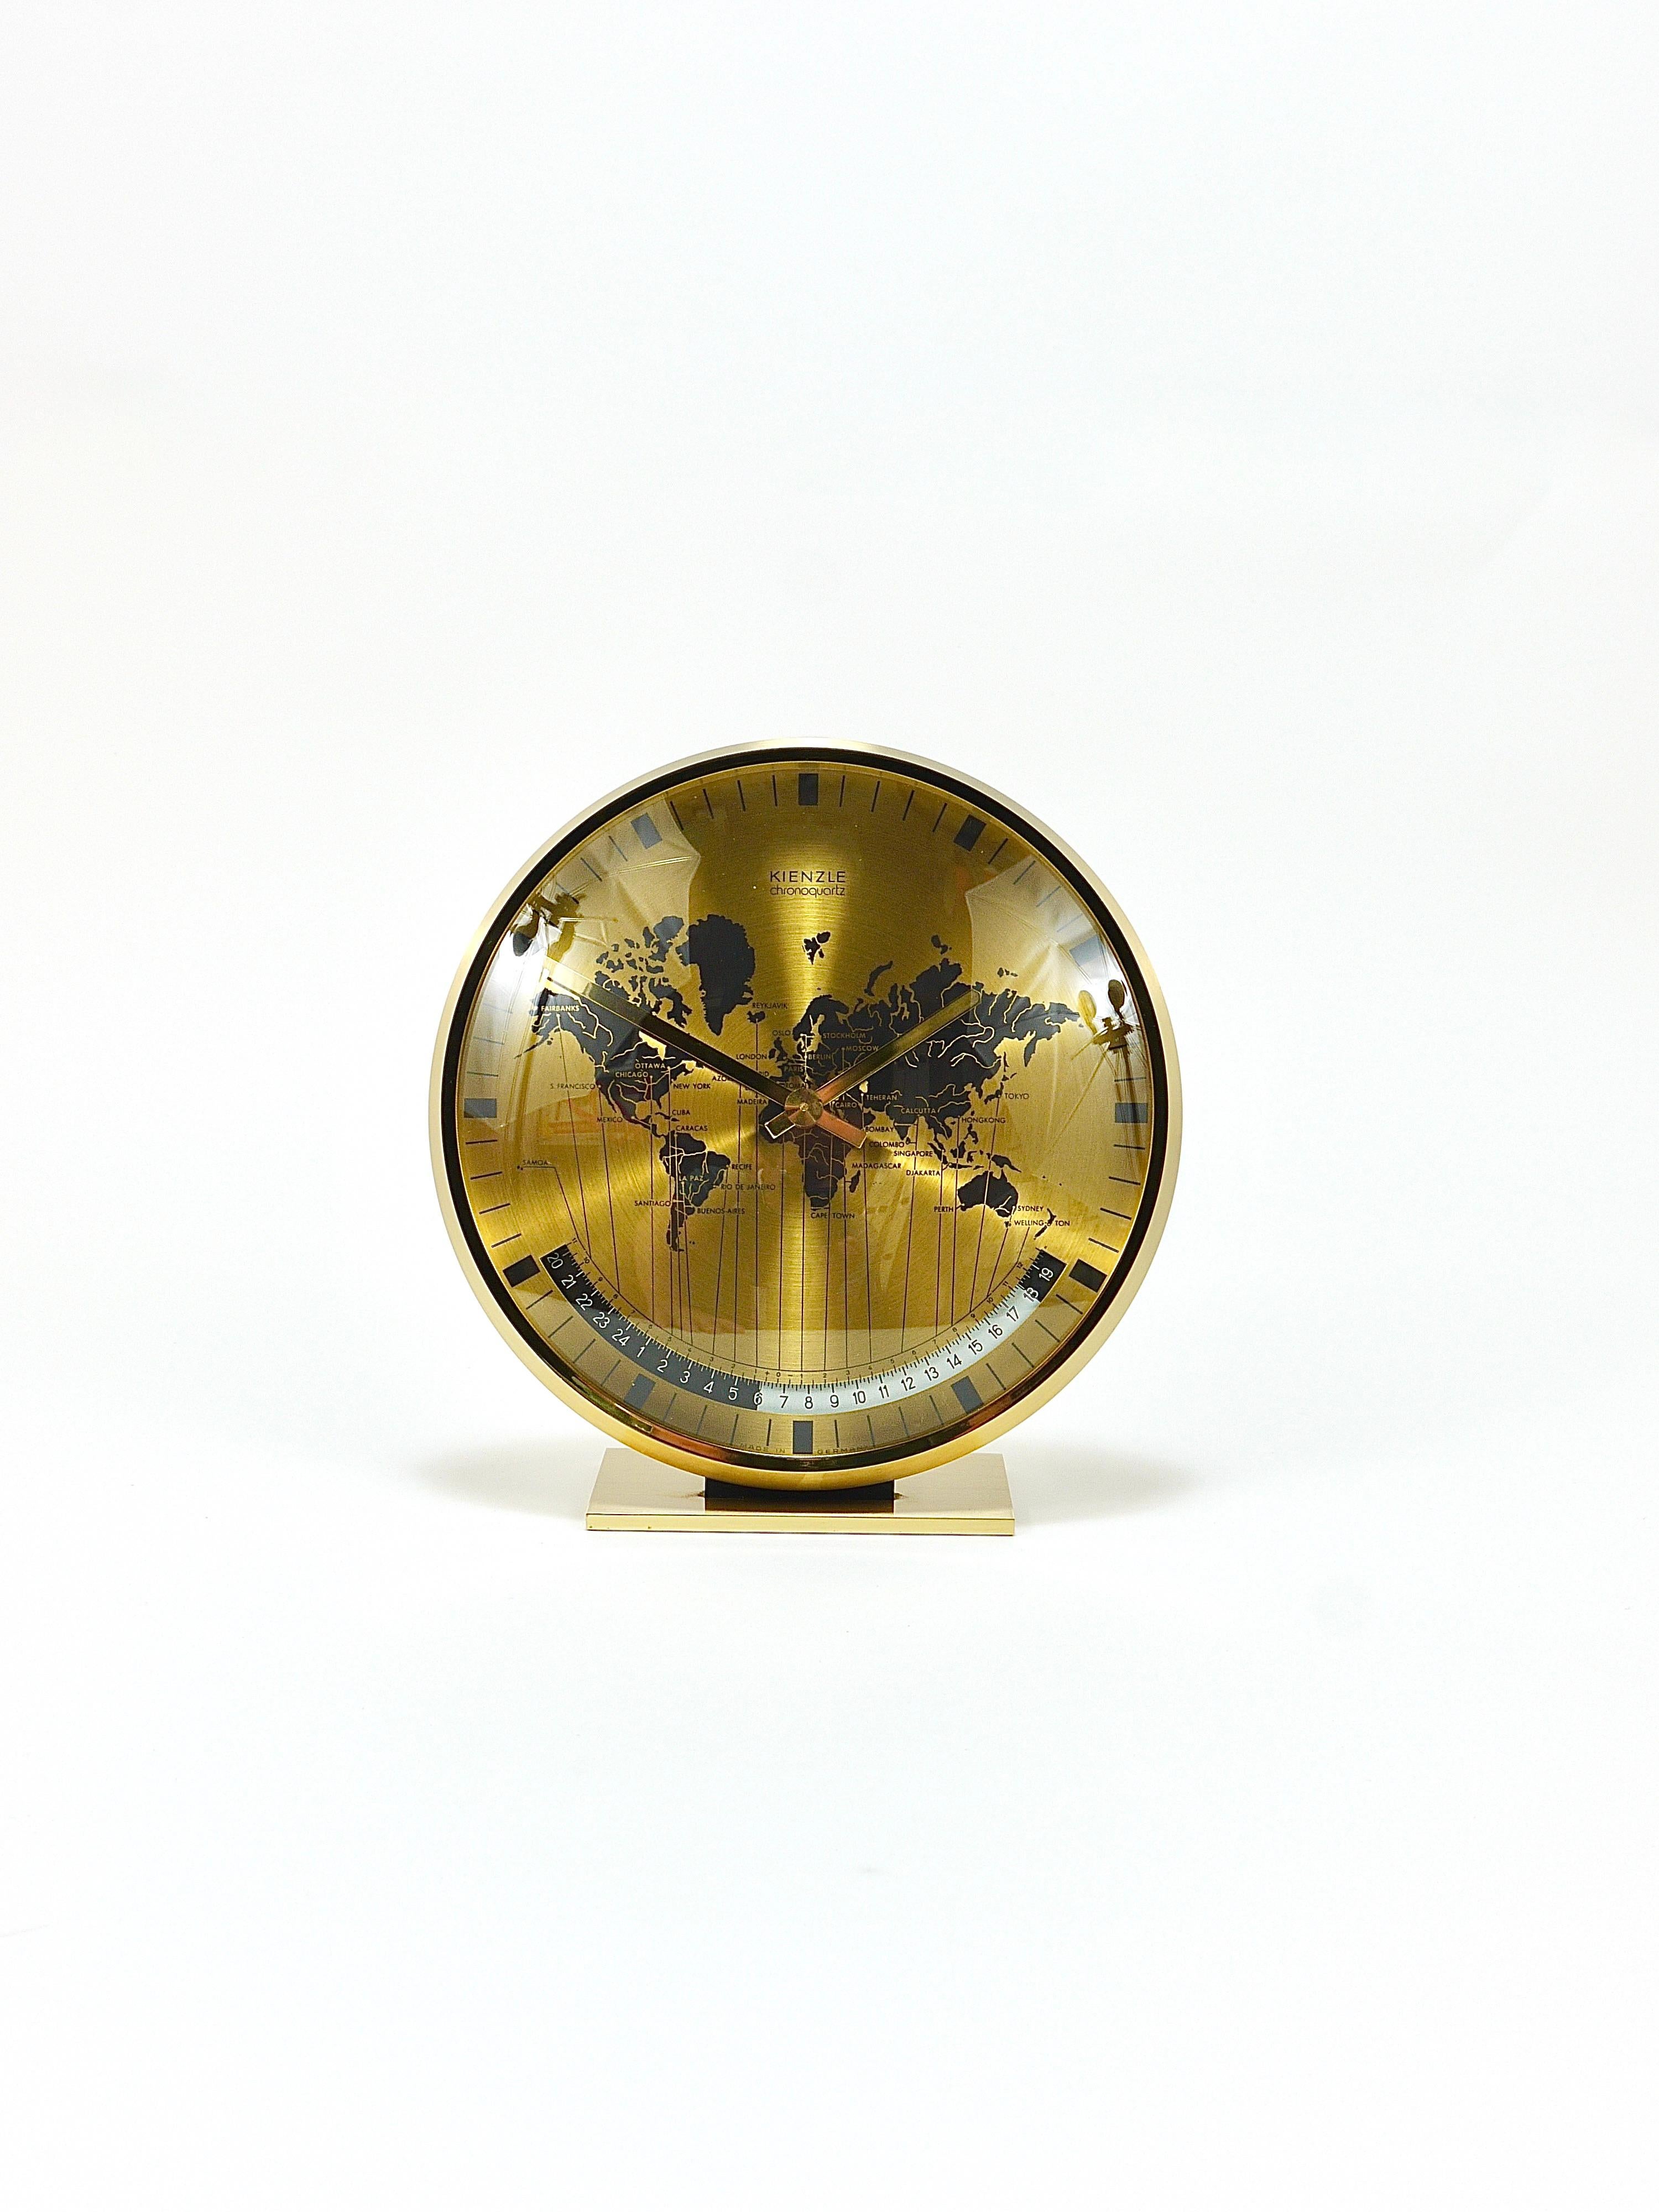 A beautiful and decorative Mid-Century Modernist solid brass Kienzle Chronoquartz desk or table clock with a domed glass and a 7“ diameter world map clocks face and world time zones. Executed in the 1960s by Kienzle in Western Germany. The housing